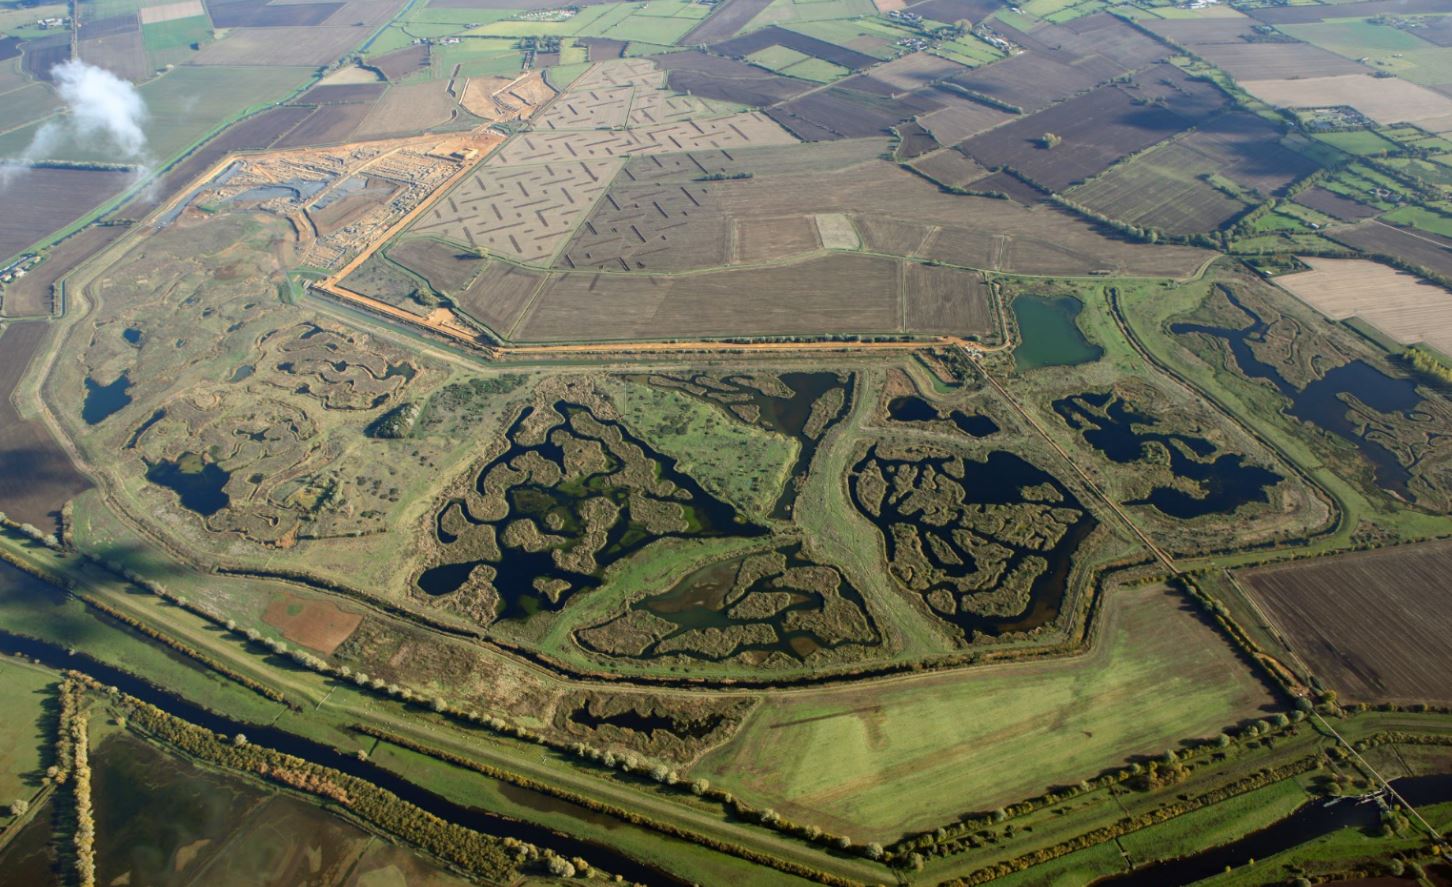  The additional land brings the RSPB Ouse Fen conservation site to 298 hectares